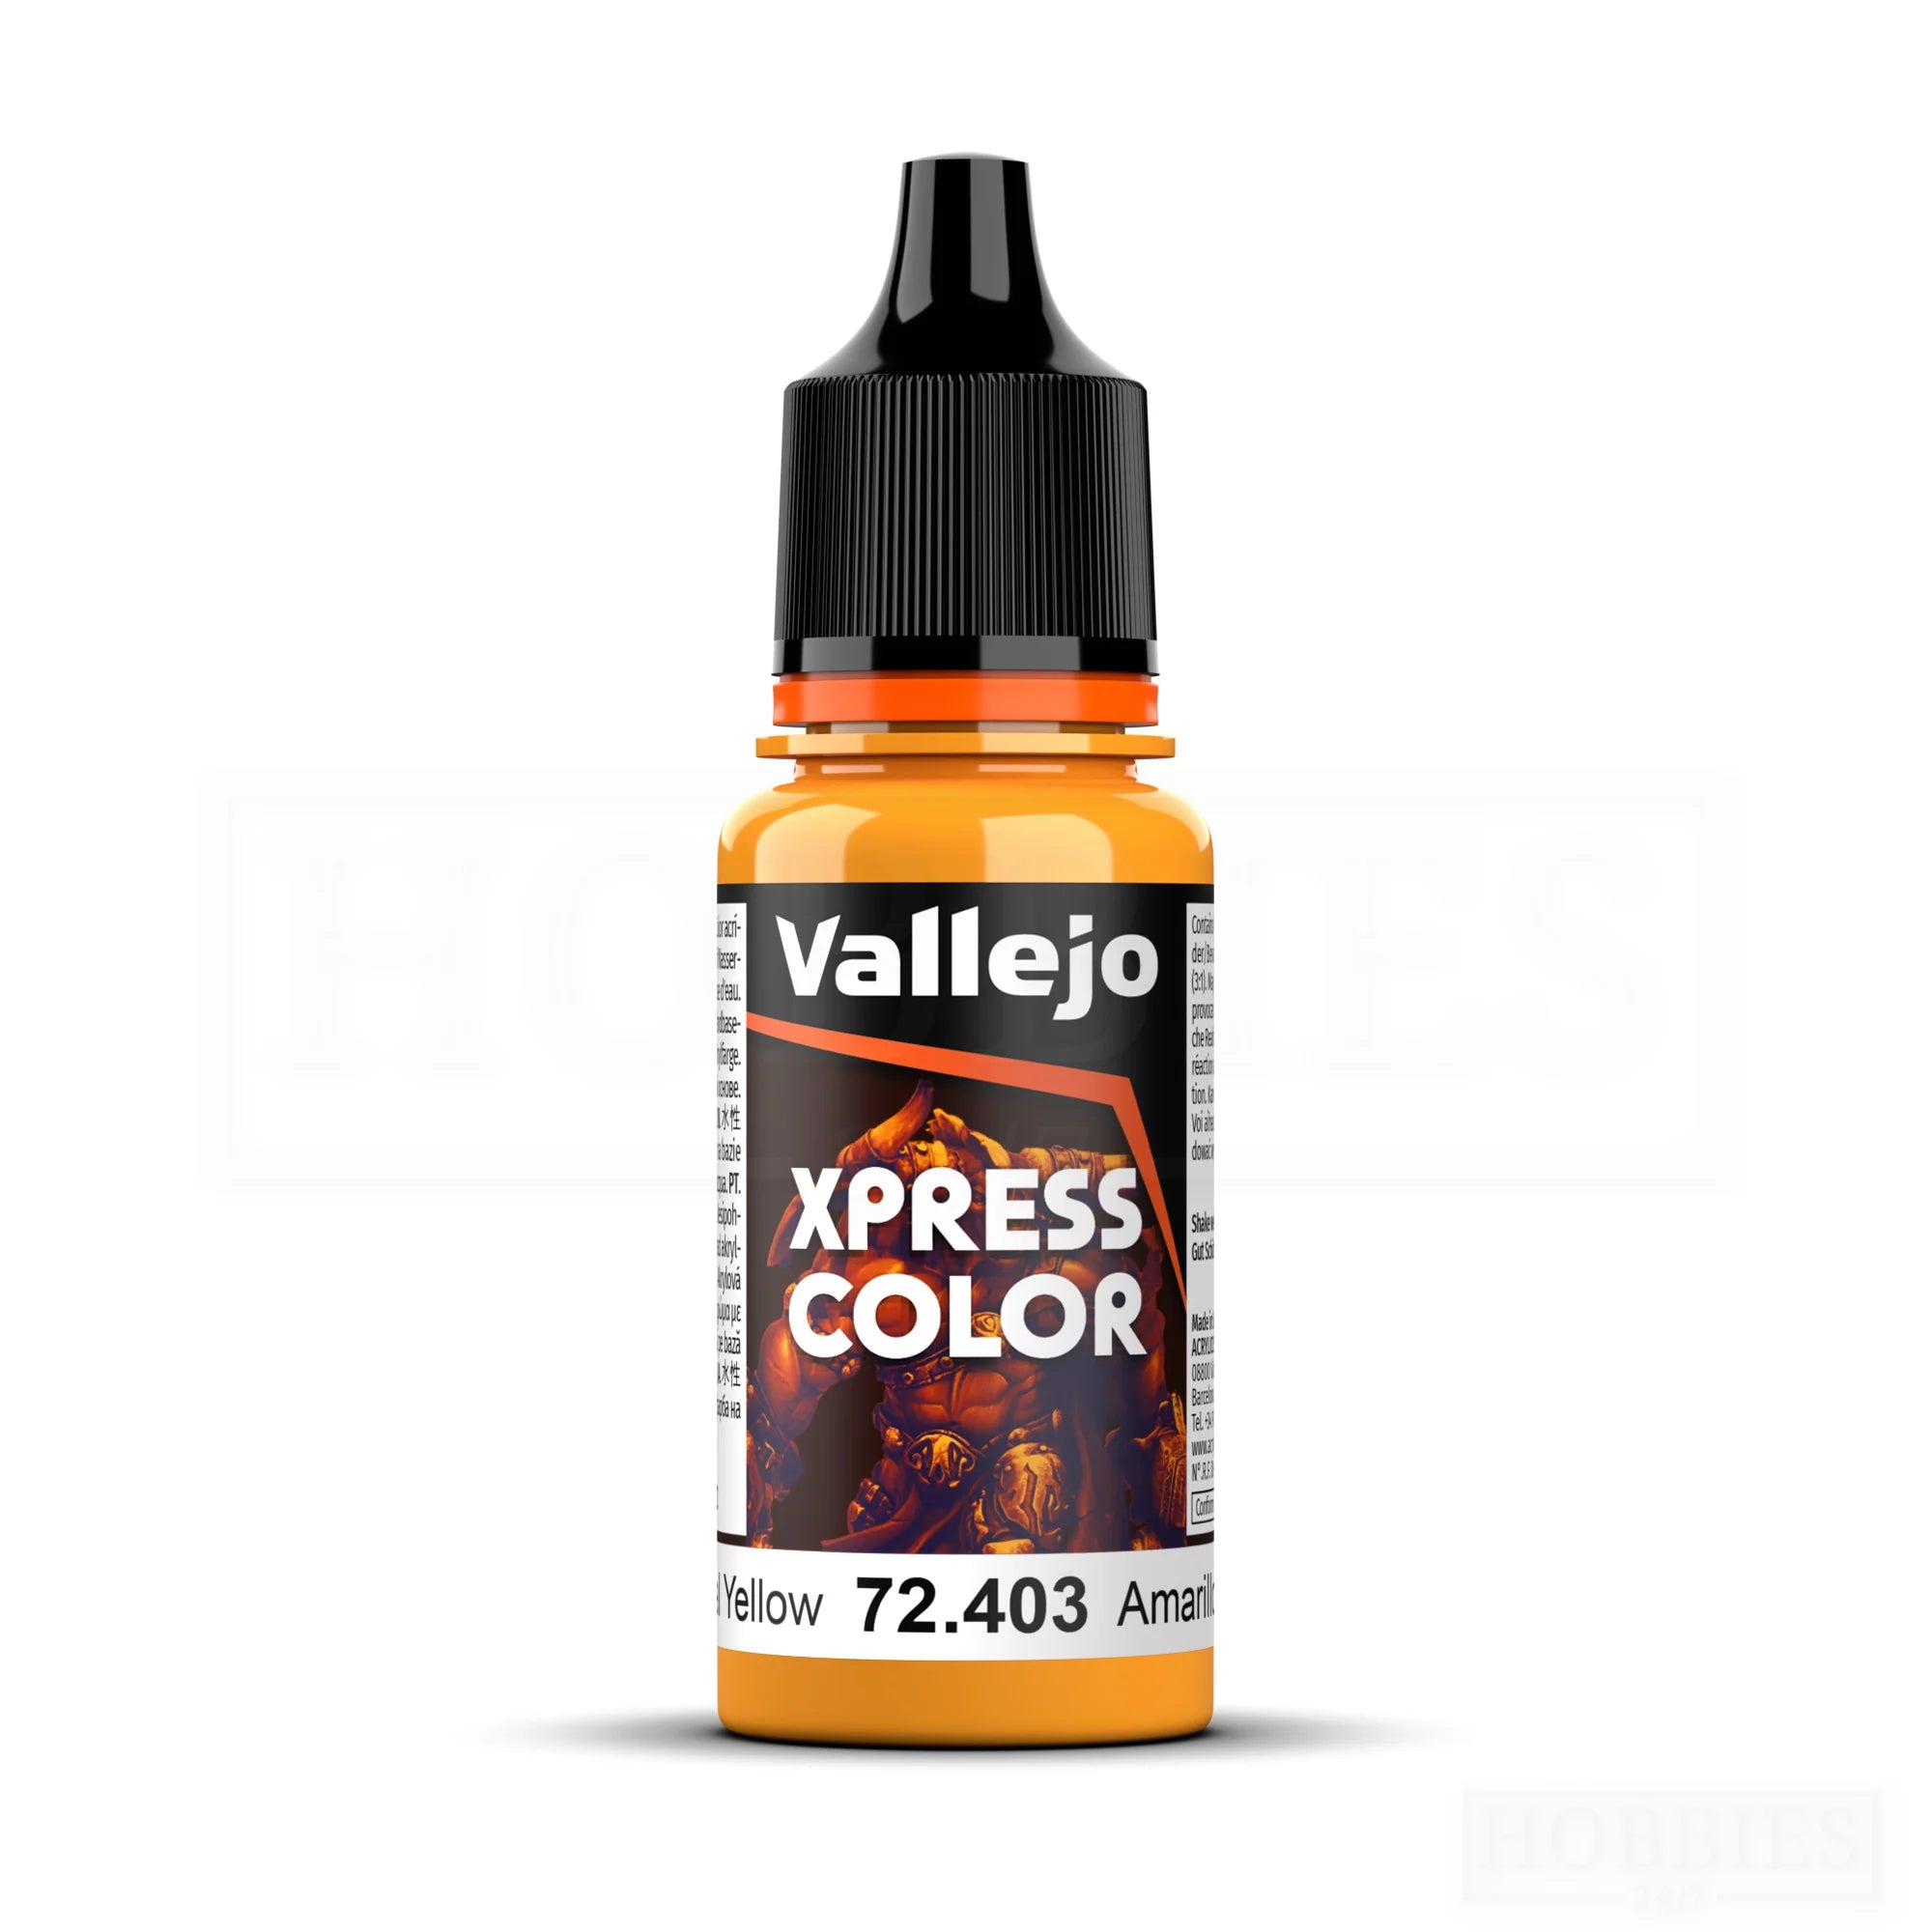 Vallejo Xpress Color Imperial Yellow 18ml